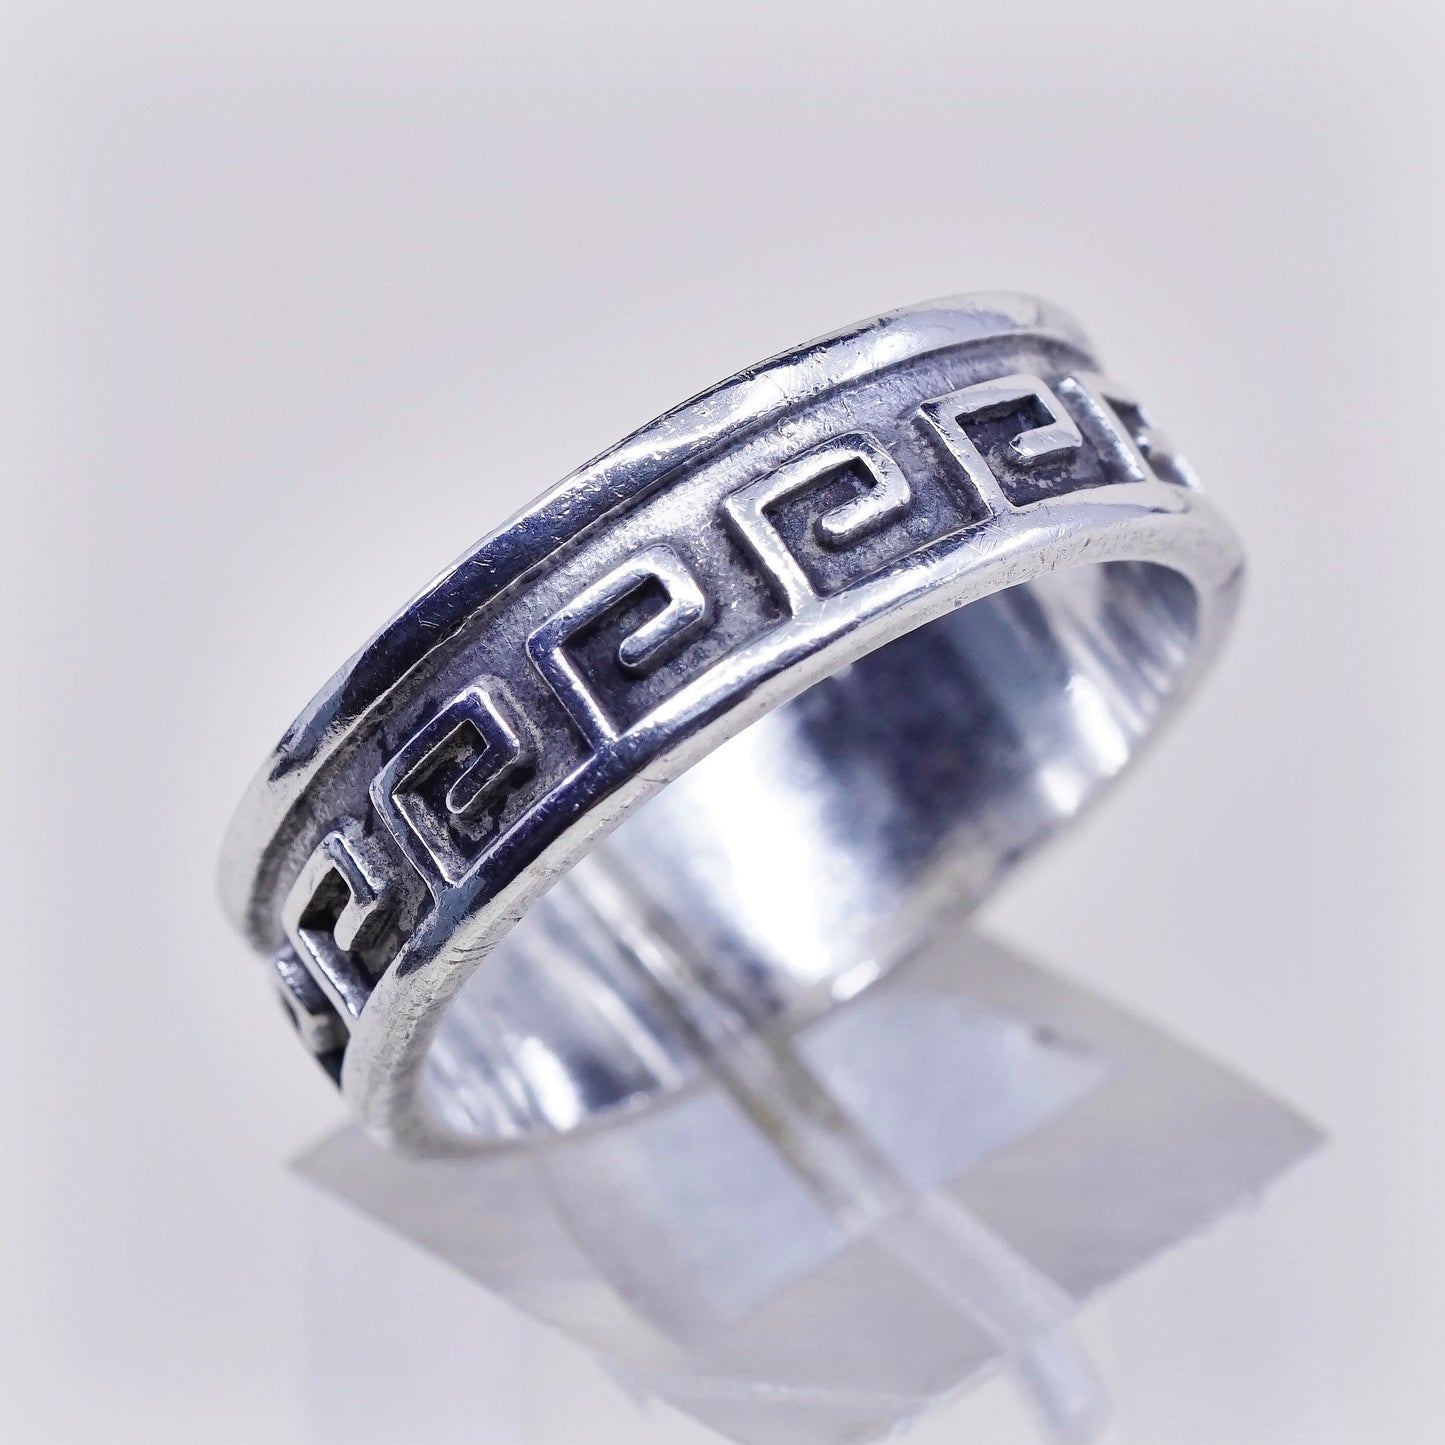 Size 12, vintage Sterling silver handmade ring, mexico Mens 925 greek key band